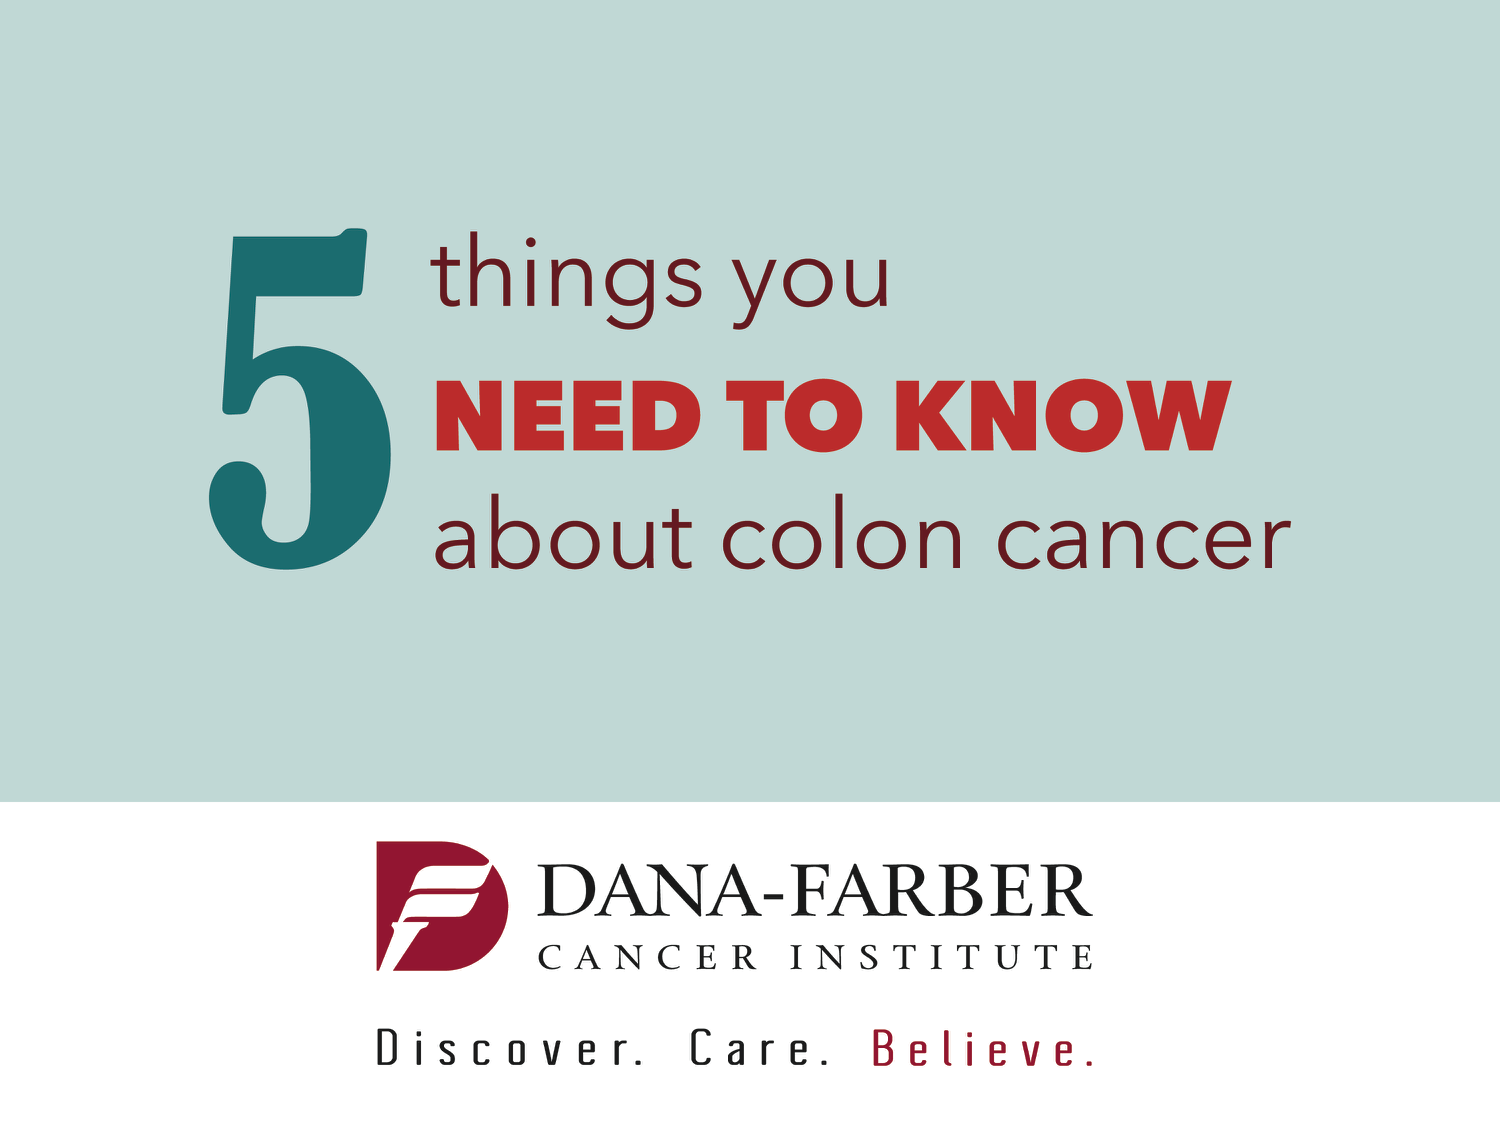 Five things you need to know about colon cancer: Colon cancer forms in the tissues of the colon, which is part of the large intestine; risk factors for colon cancer include age (50 or older) and a family history of cancer of the colon or the rectum, a history of polyps in the colon or rectum, a history of inflammatory bowel disease (Chron's disease or ulcerative colitis), obesity, smoking, alcohol; for most patients, screening should start at age 50; options for screening include fecal occult blood testing, sigmoidoscopy, colonoscopy, virtual colonoscopy, stool DNA test, double-contrast barium enema; one of the most common signs of colon cancer is a change of bowel habits (such as diarrhea, constipation or feeling the bowel does not empty completely, stools that are narrower than usual, frequent gas pains, fullness, bloating, or cramps, unexplained weight loss, persistent tiredness, vomiting) or blood in the stool; surgery to remove the cancer is the most common treatment for all stages of colon cancer, chemotherapy and/or radiation therapy may be recommended.